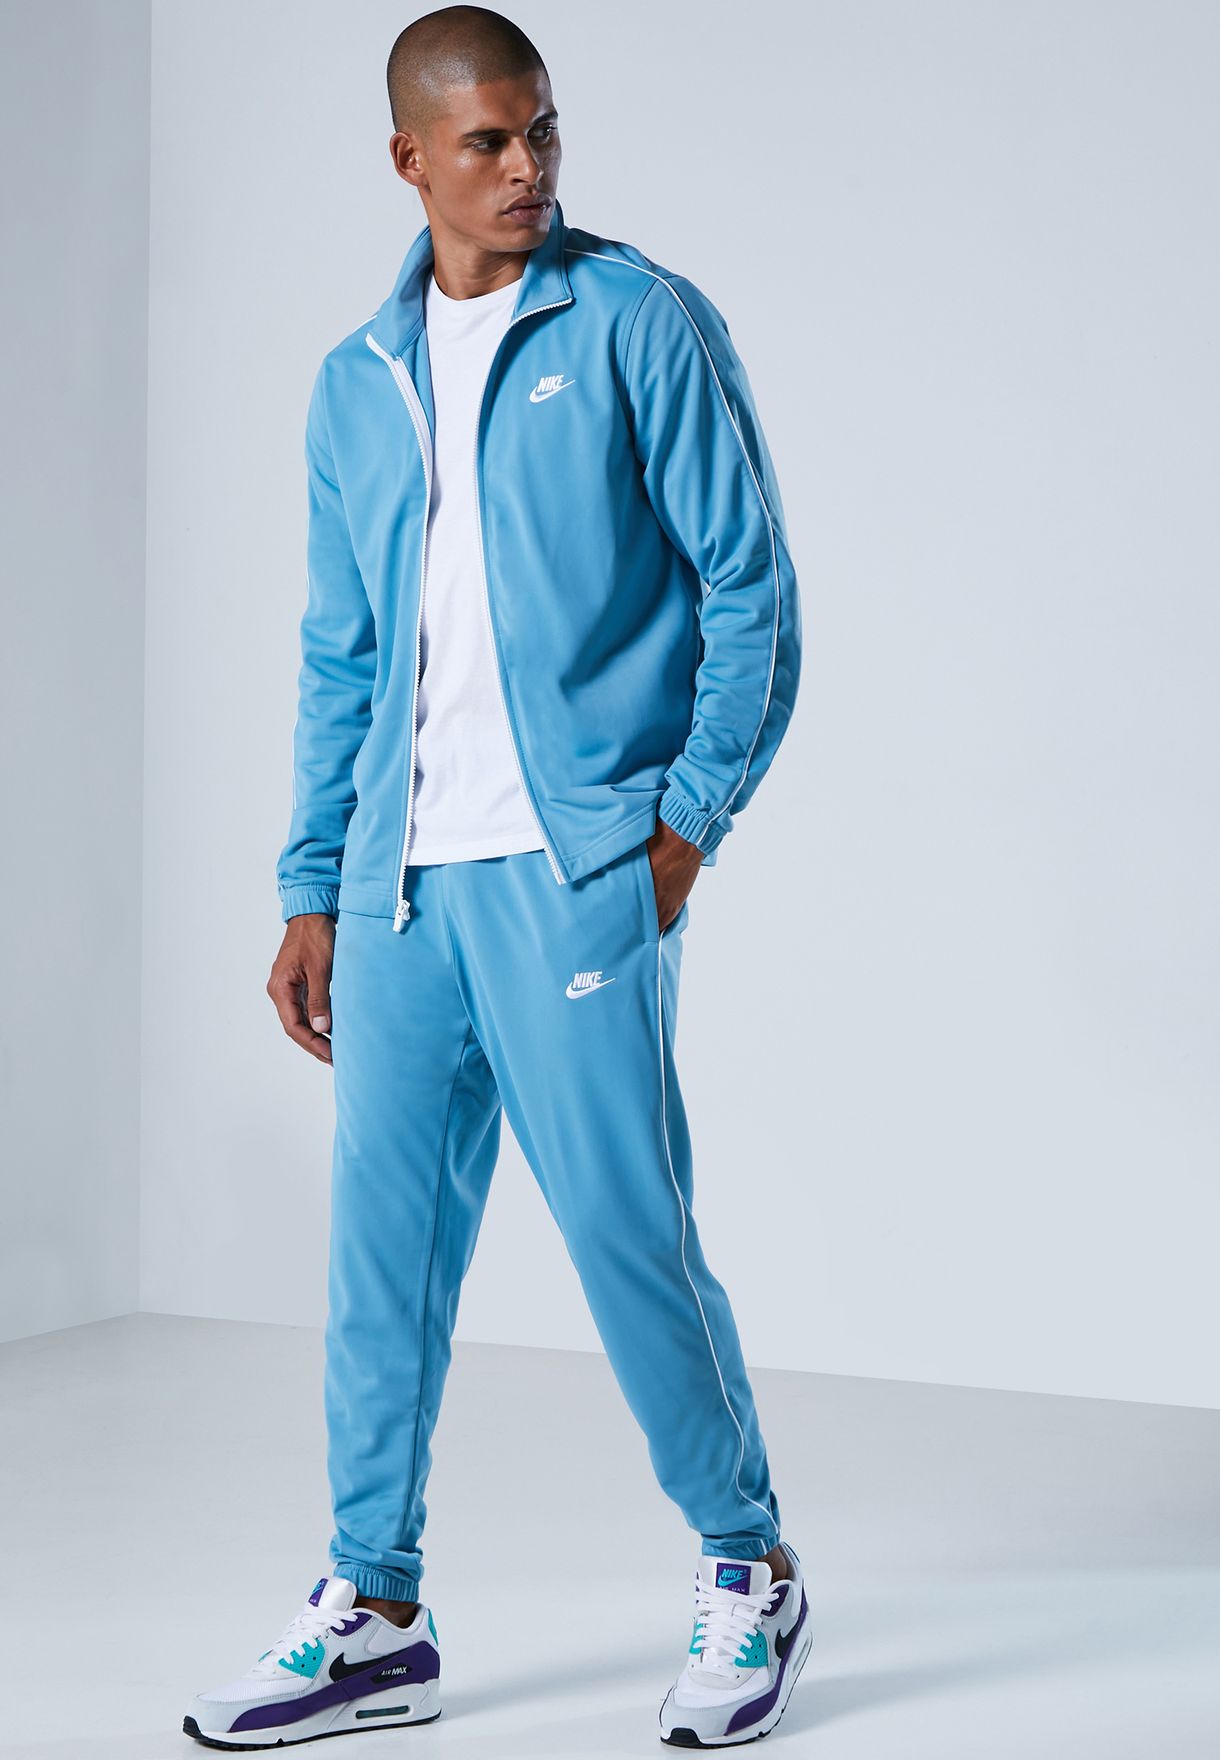 Buy > nike joggers baby blue > in stock